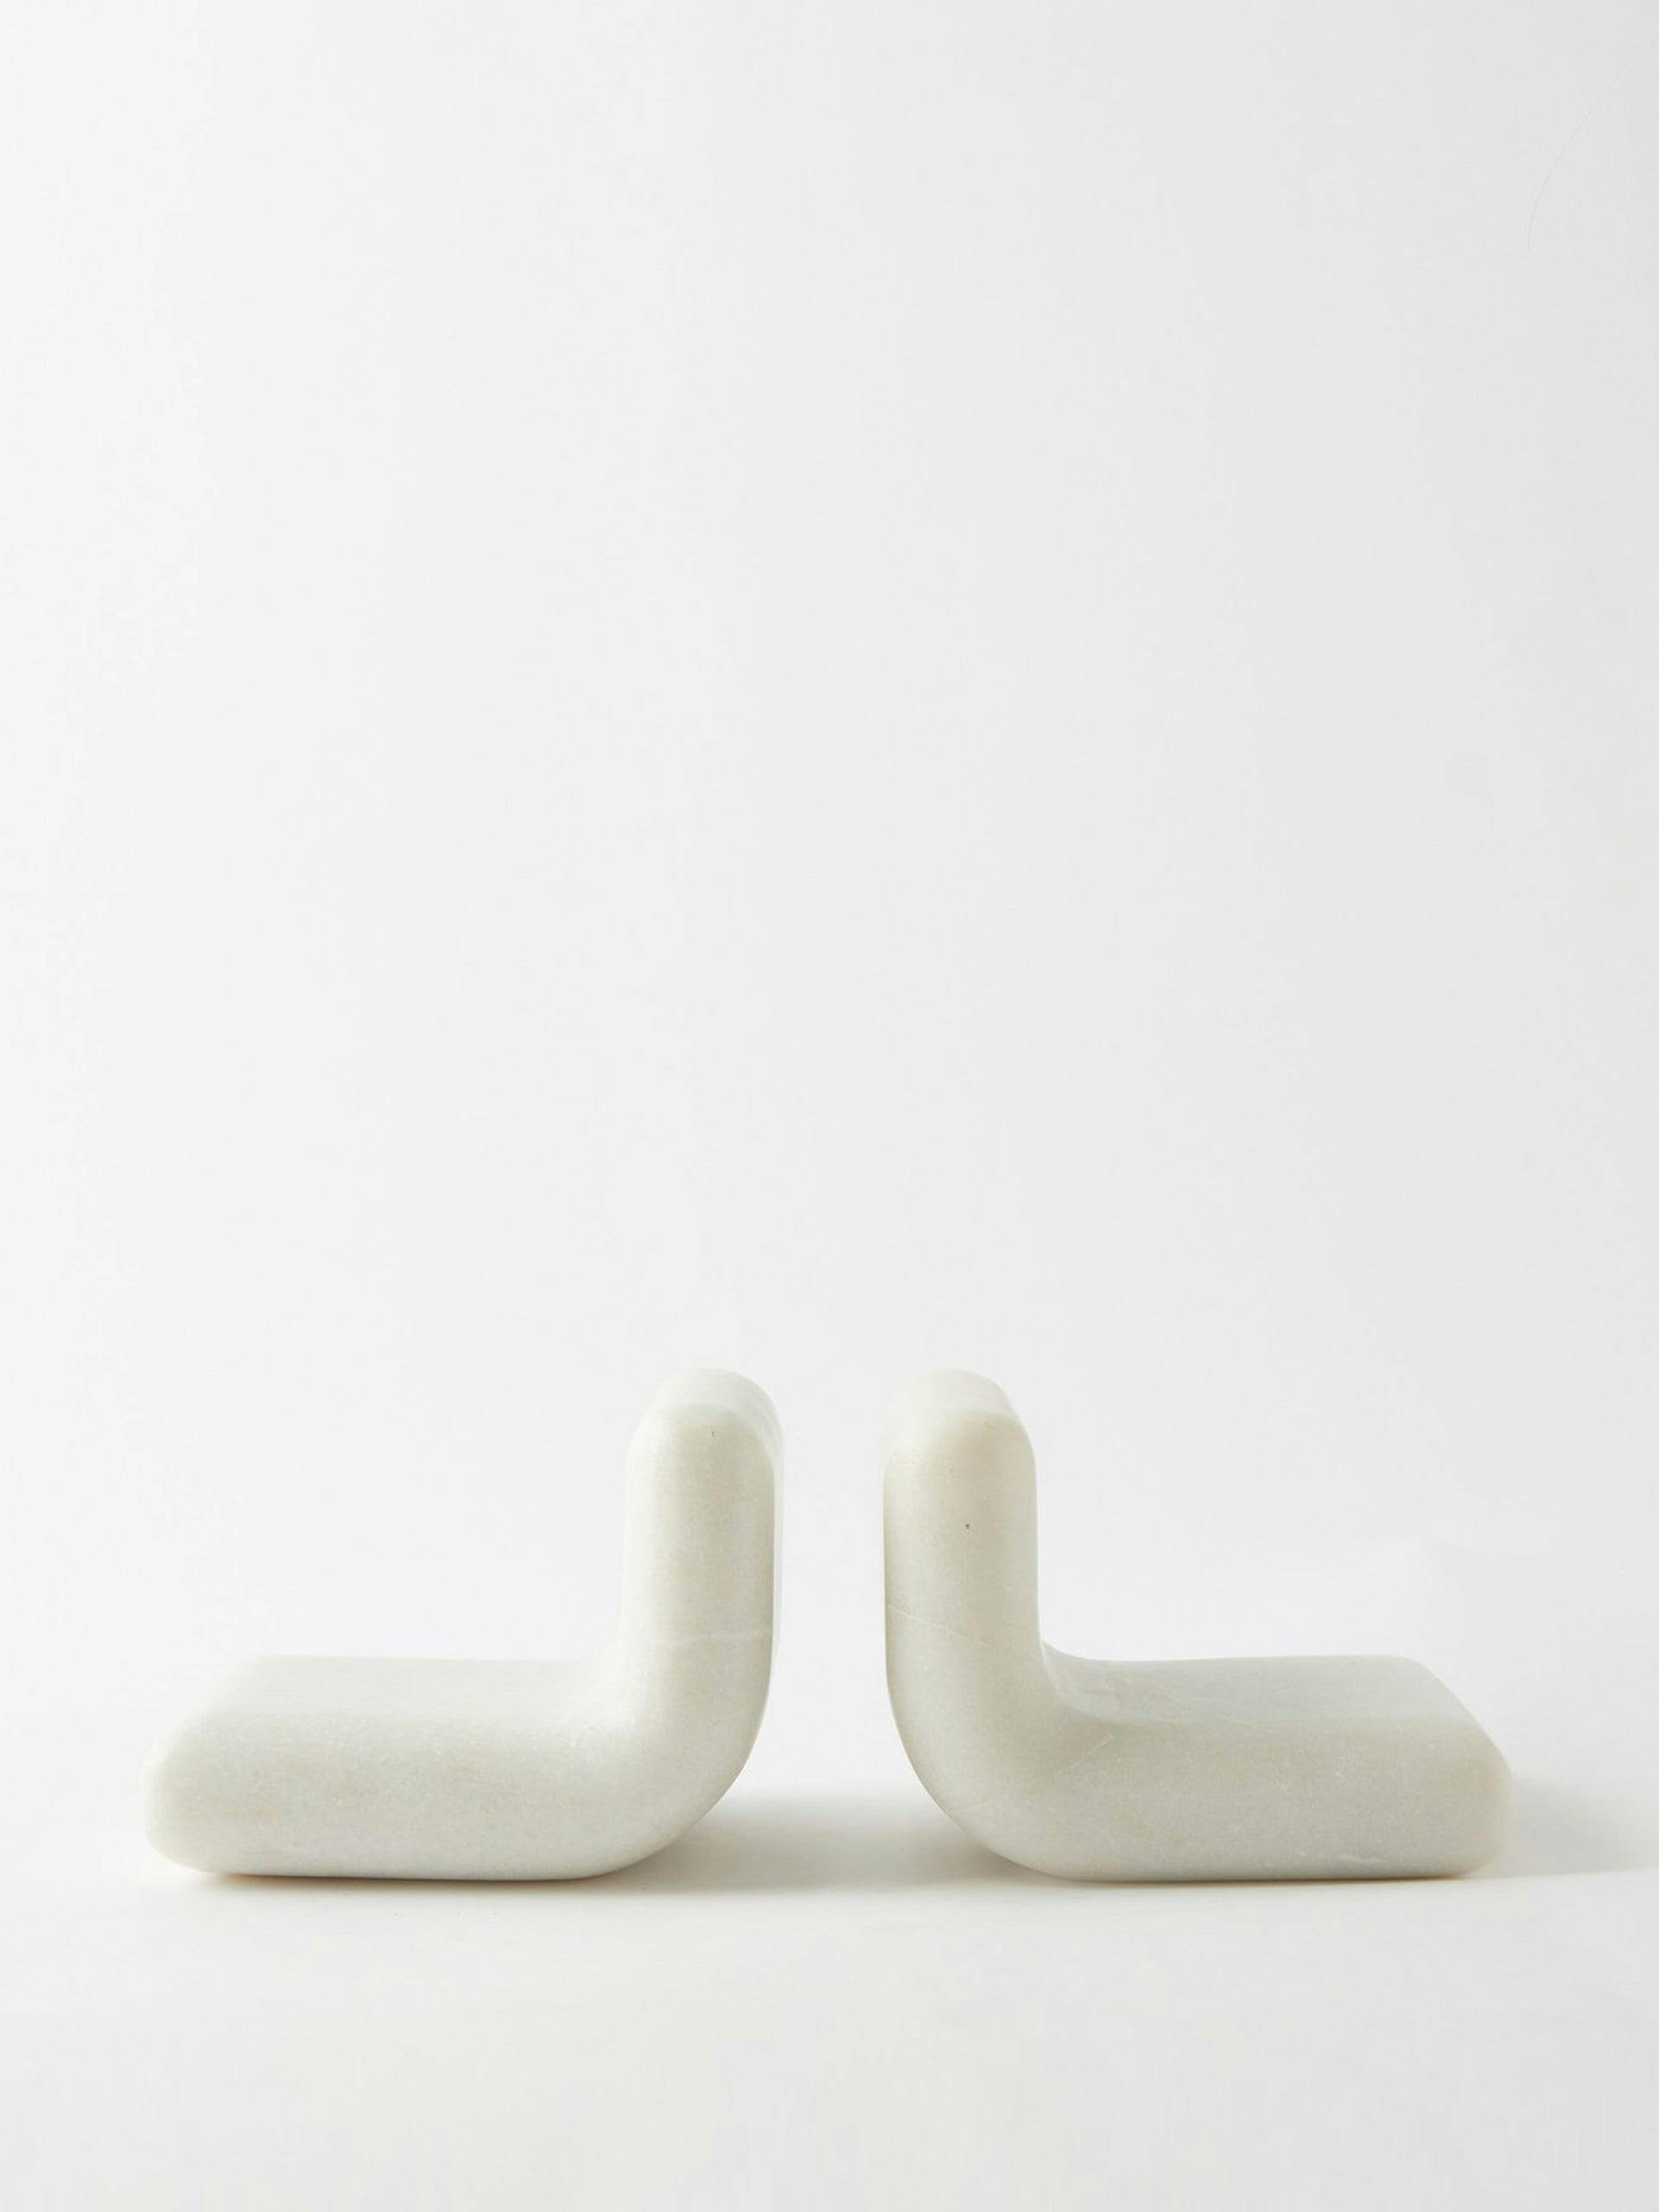 Rock marble bookends